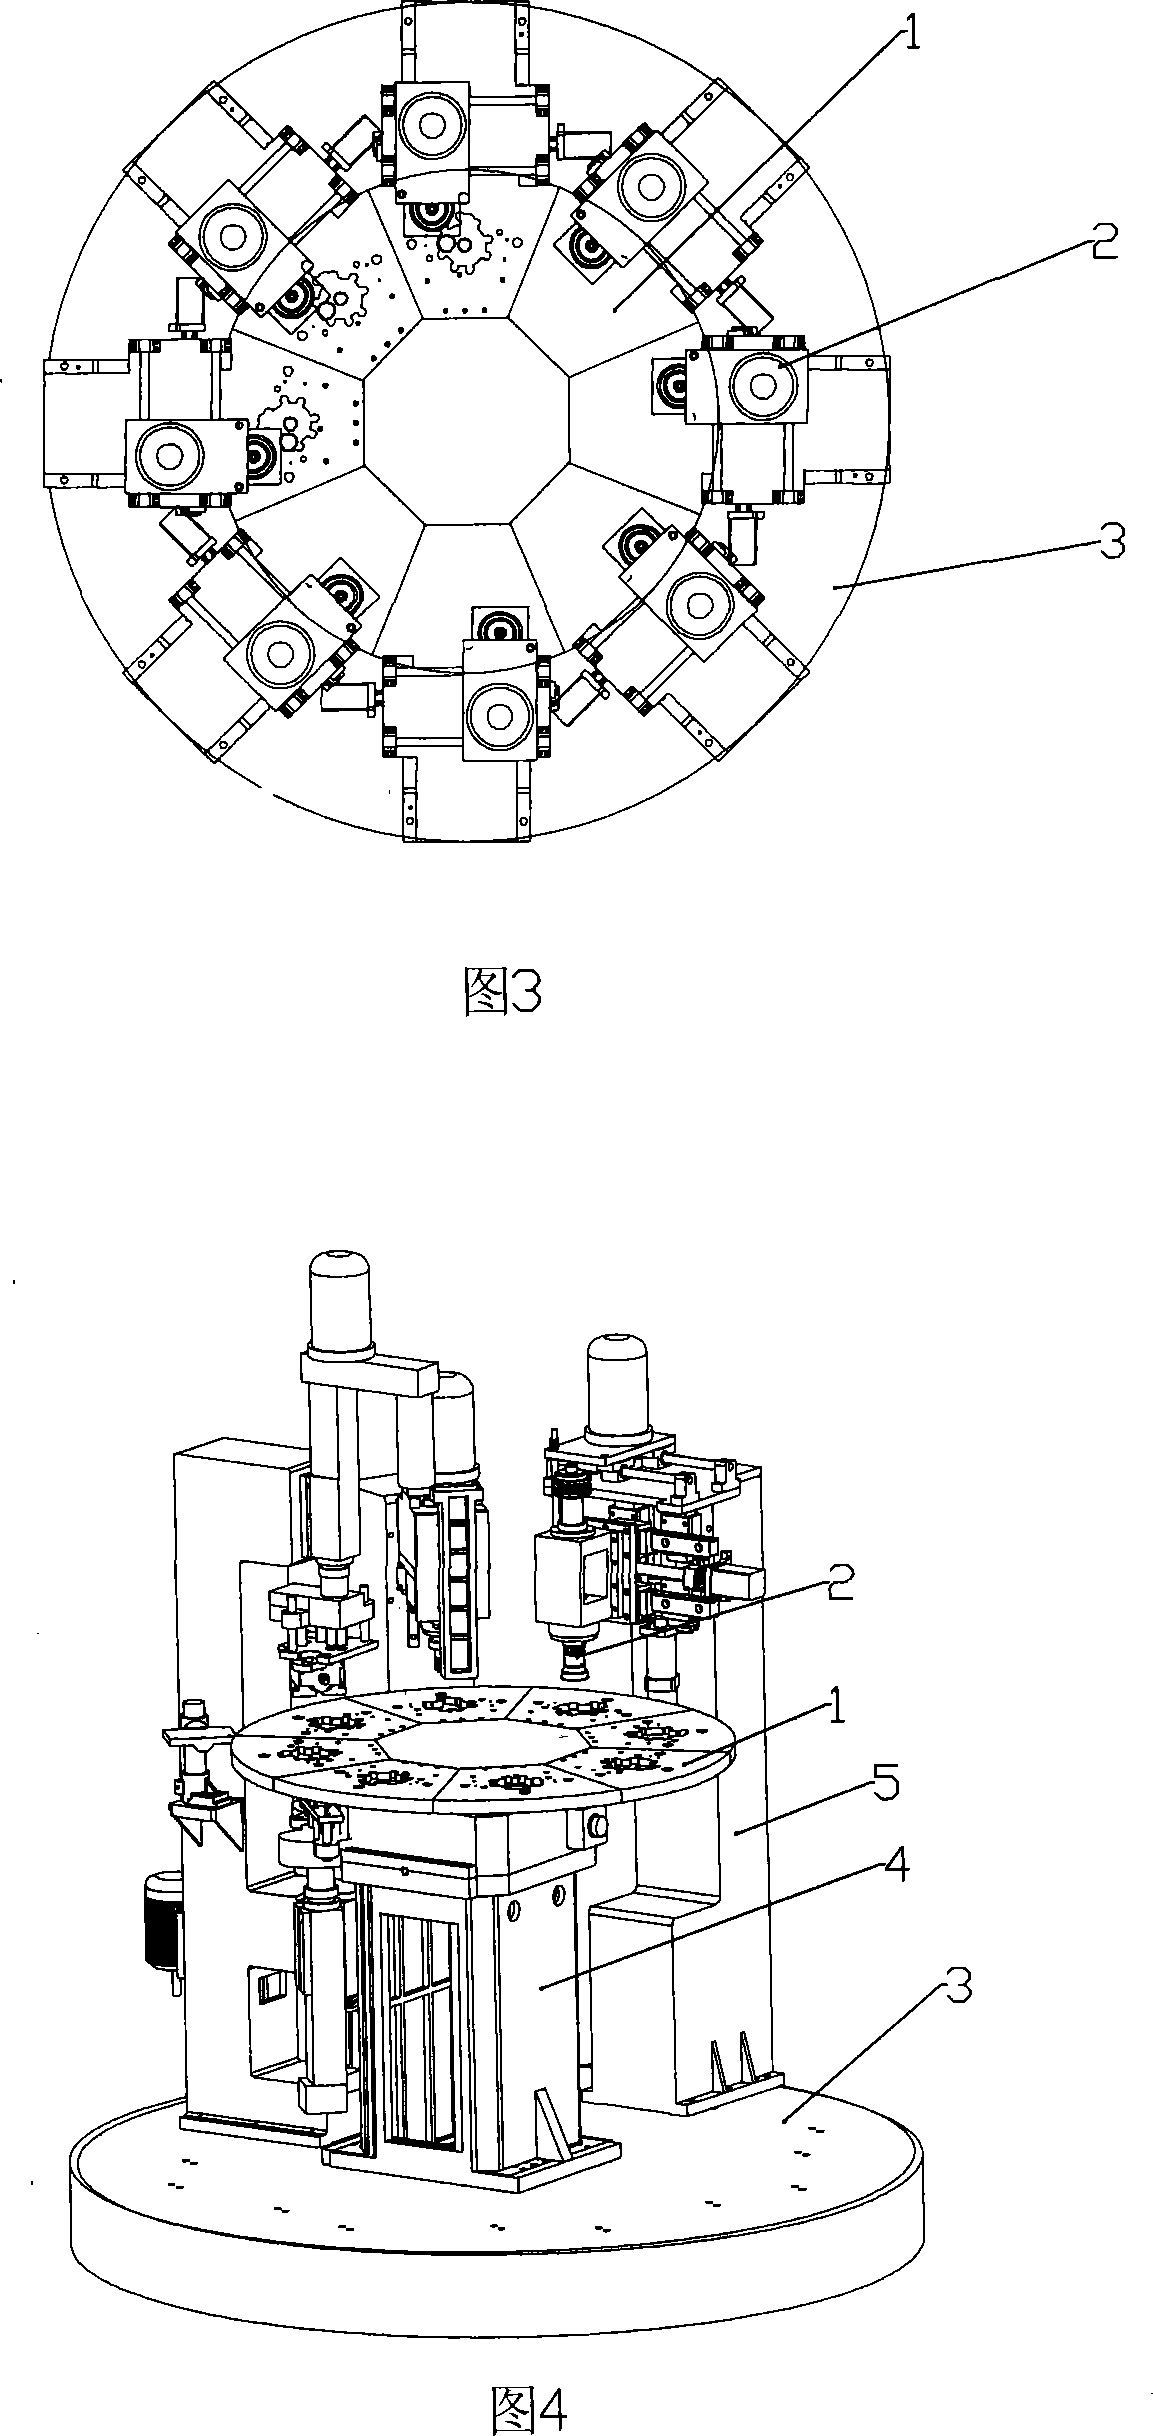 Multi-station combined machine tool